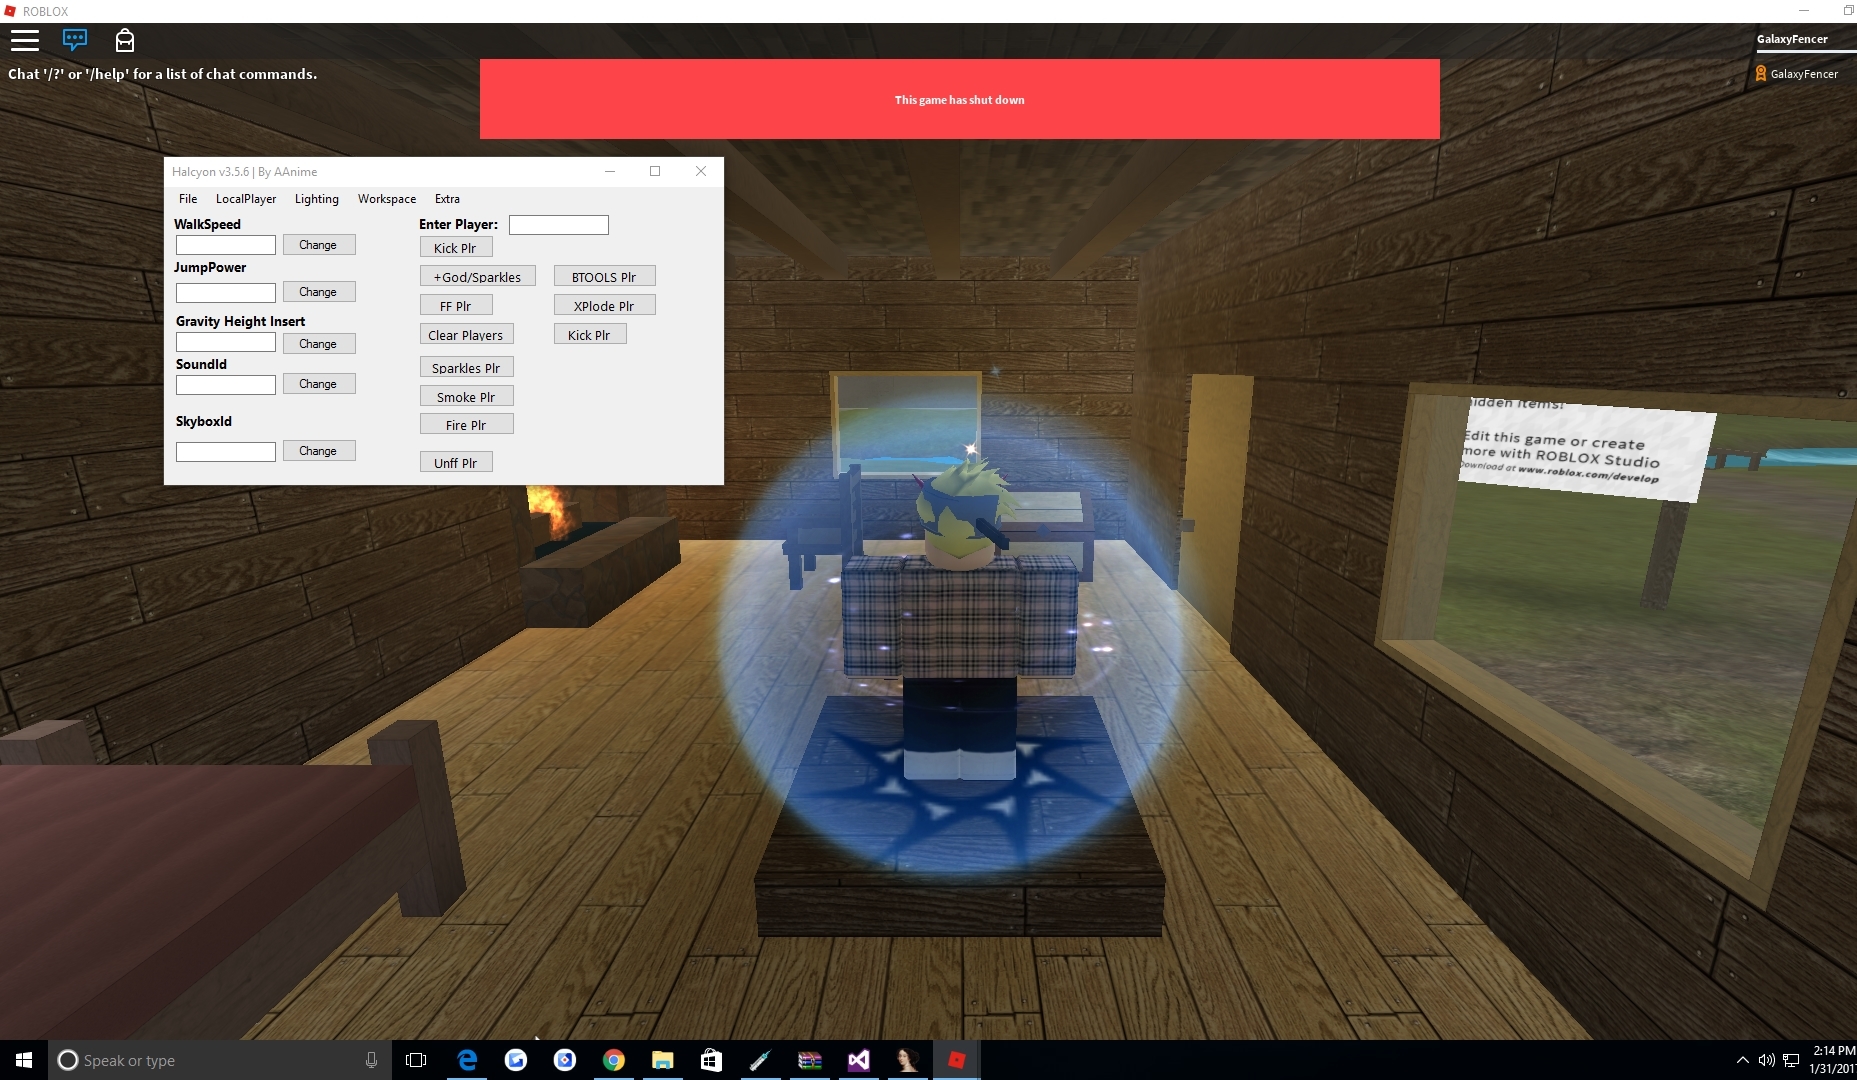 Selling Copies 5 Beta Testers Halcyon V3 5 6 Made Byt Aanime - how to use btools in roblox studio